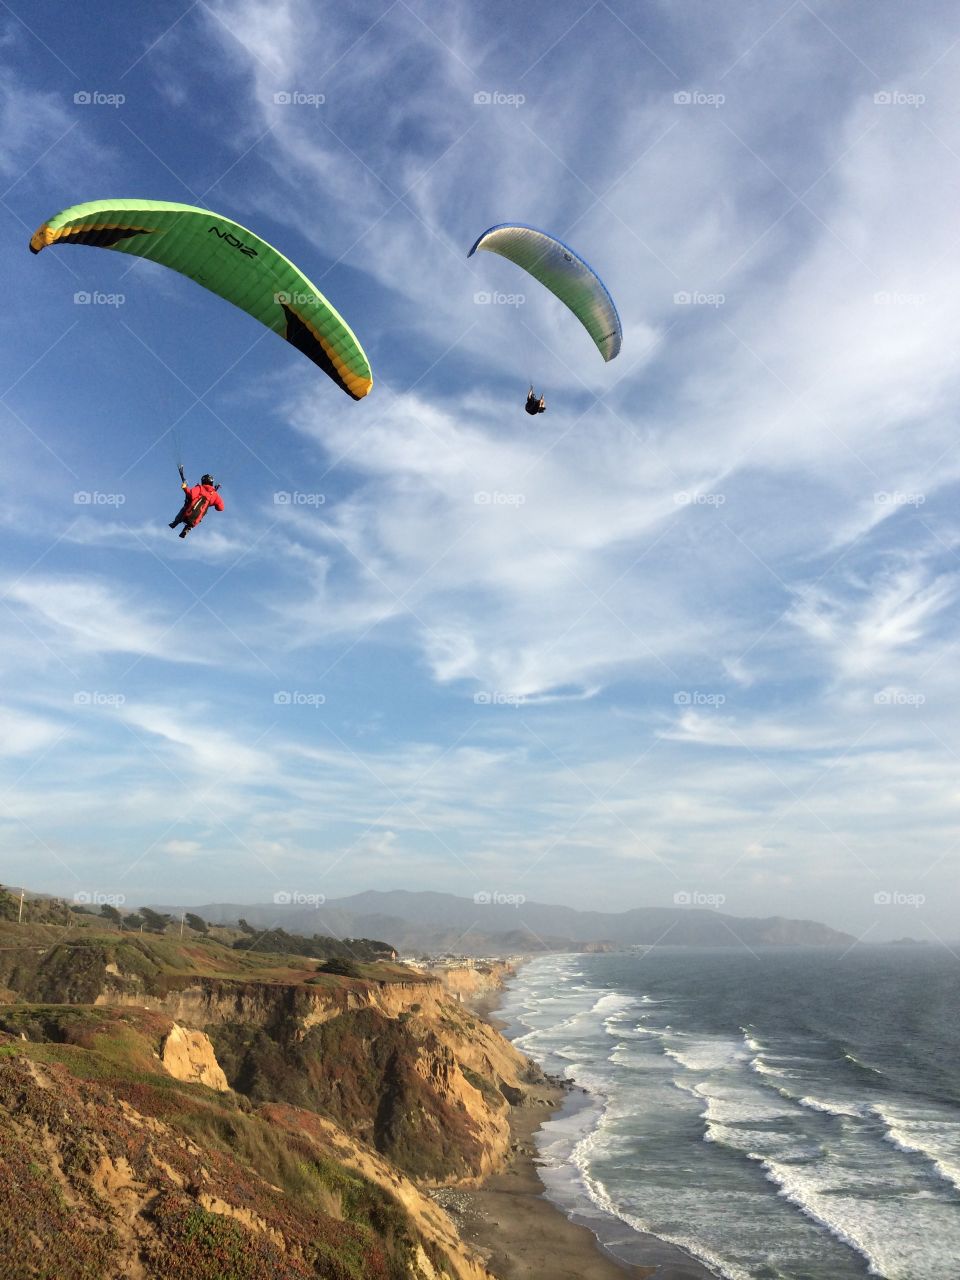 Paragliders at the coast. Two flyers enjoying a hang over the Pacific Ocean. 